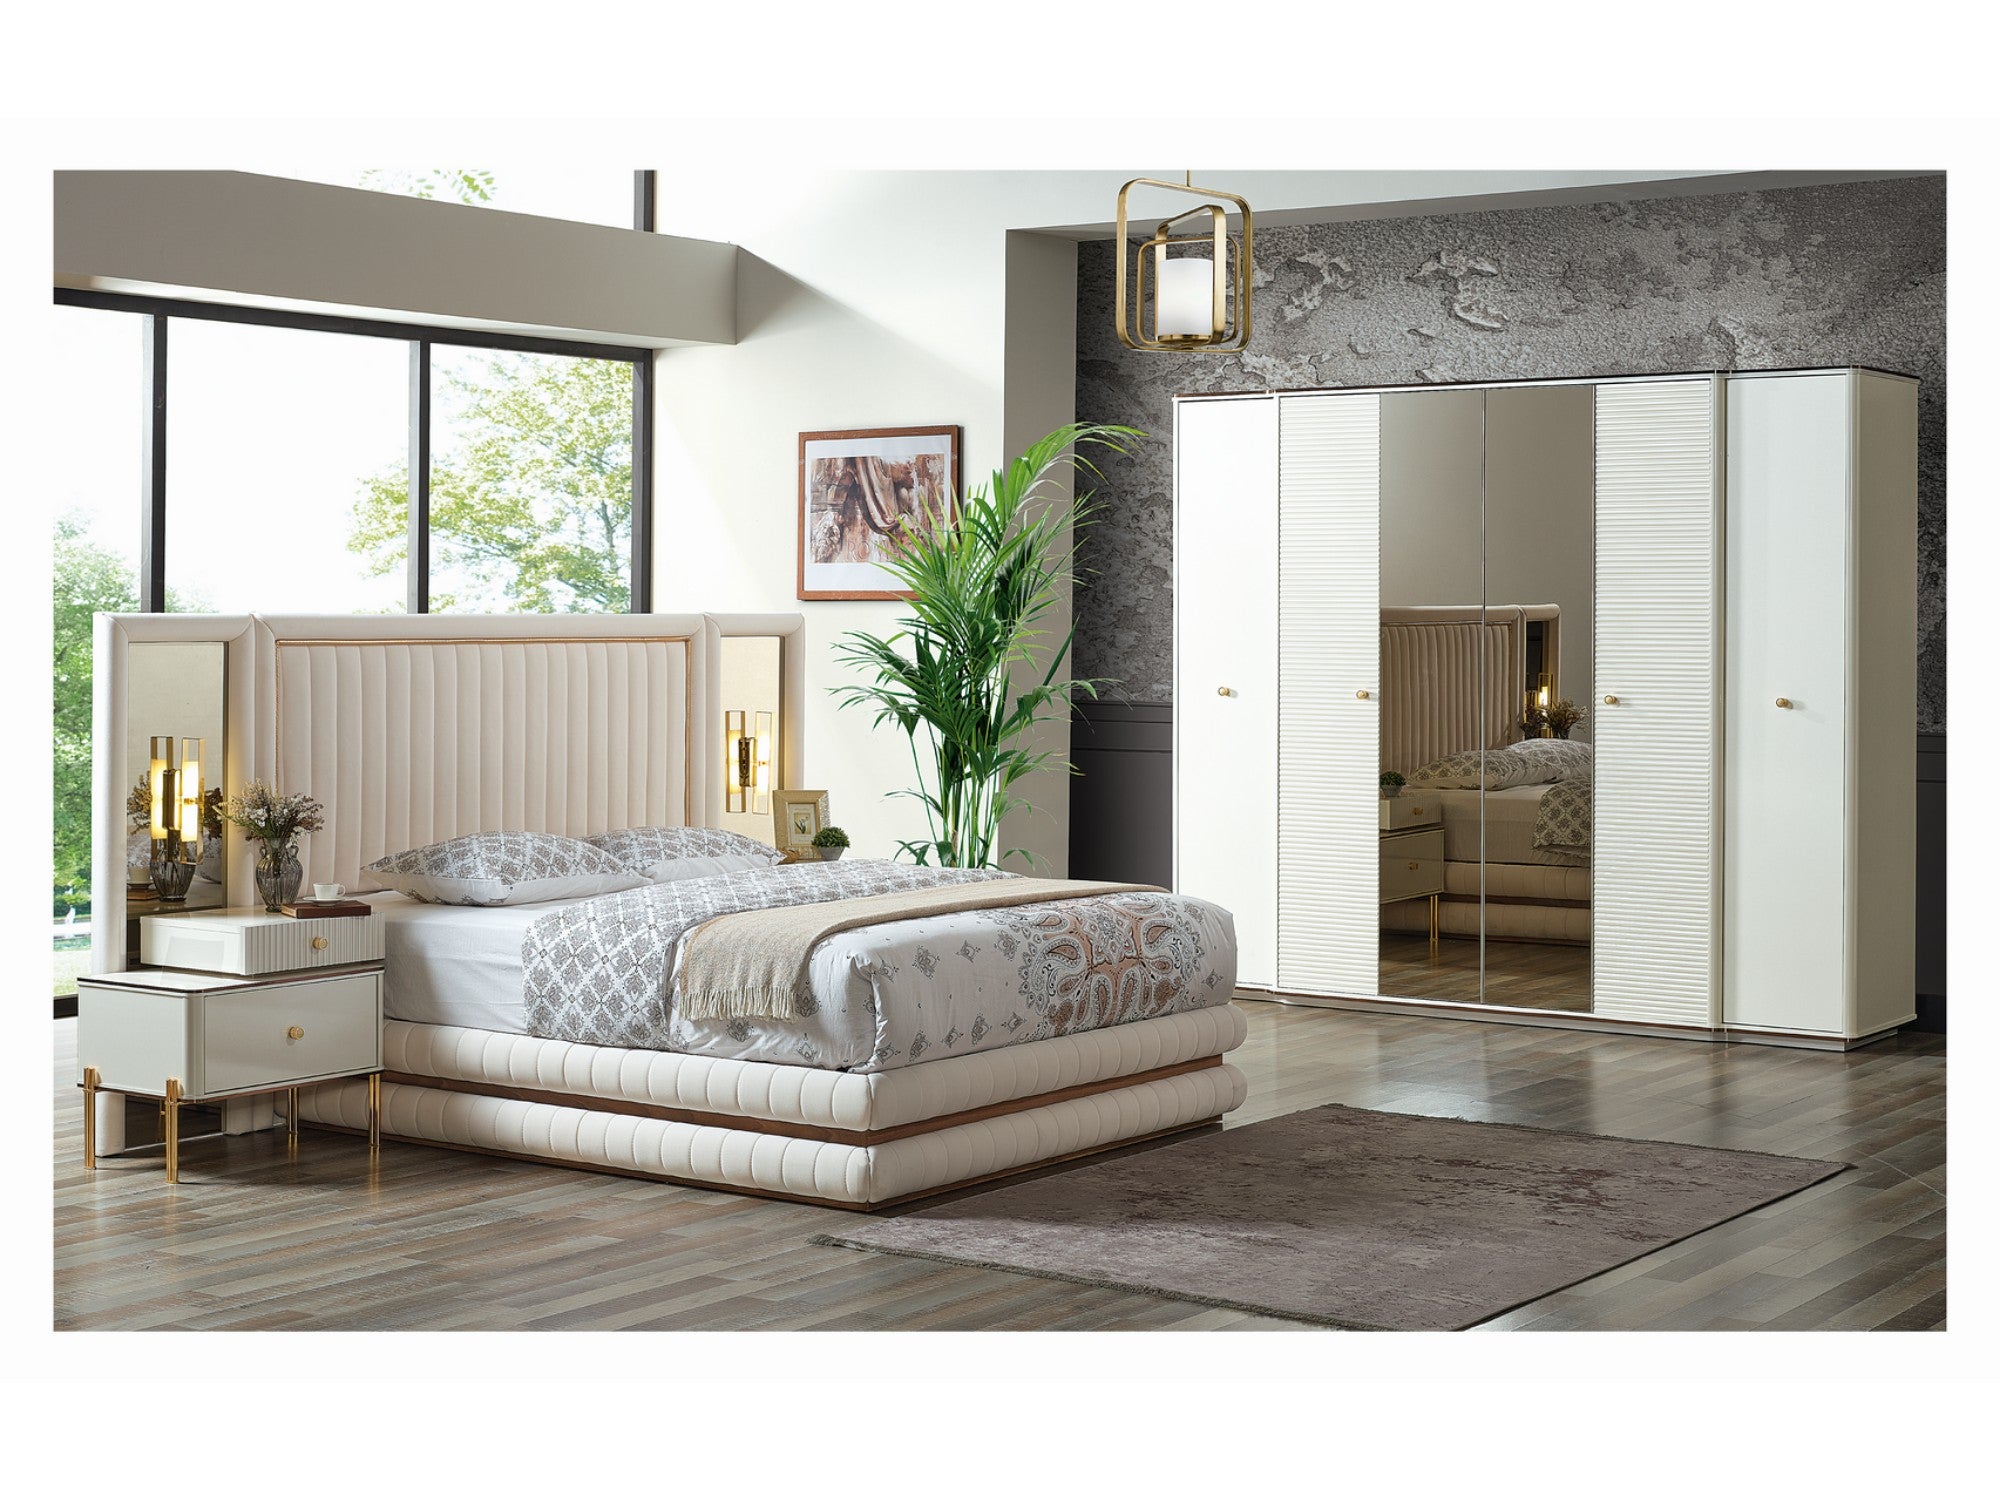 Zumrut Storage Bed With Headboard and Side Panel